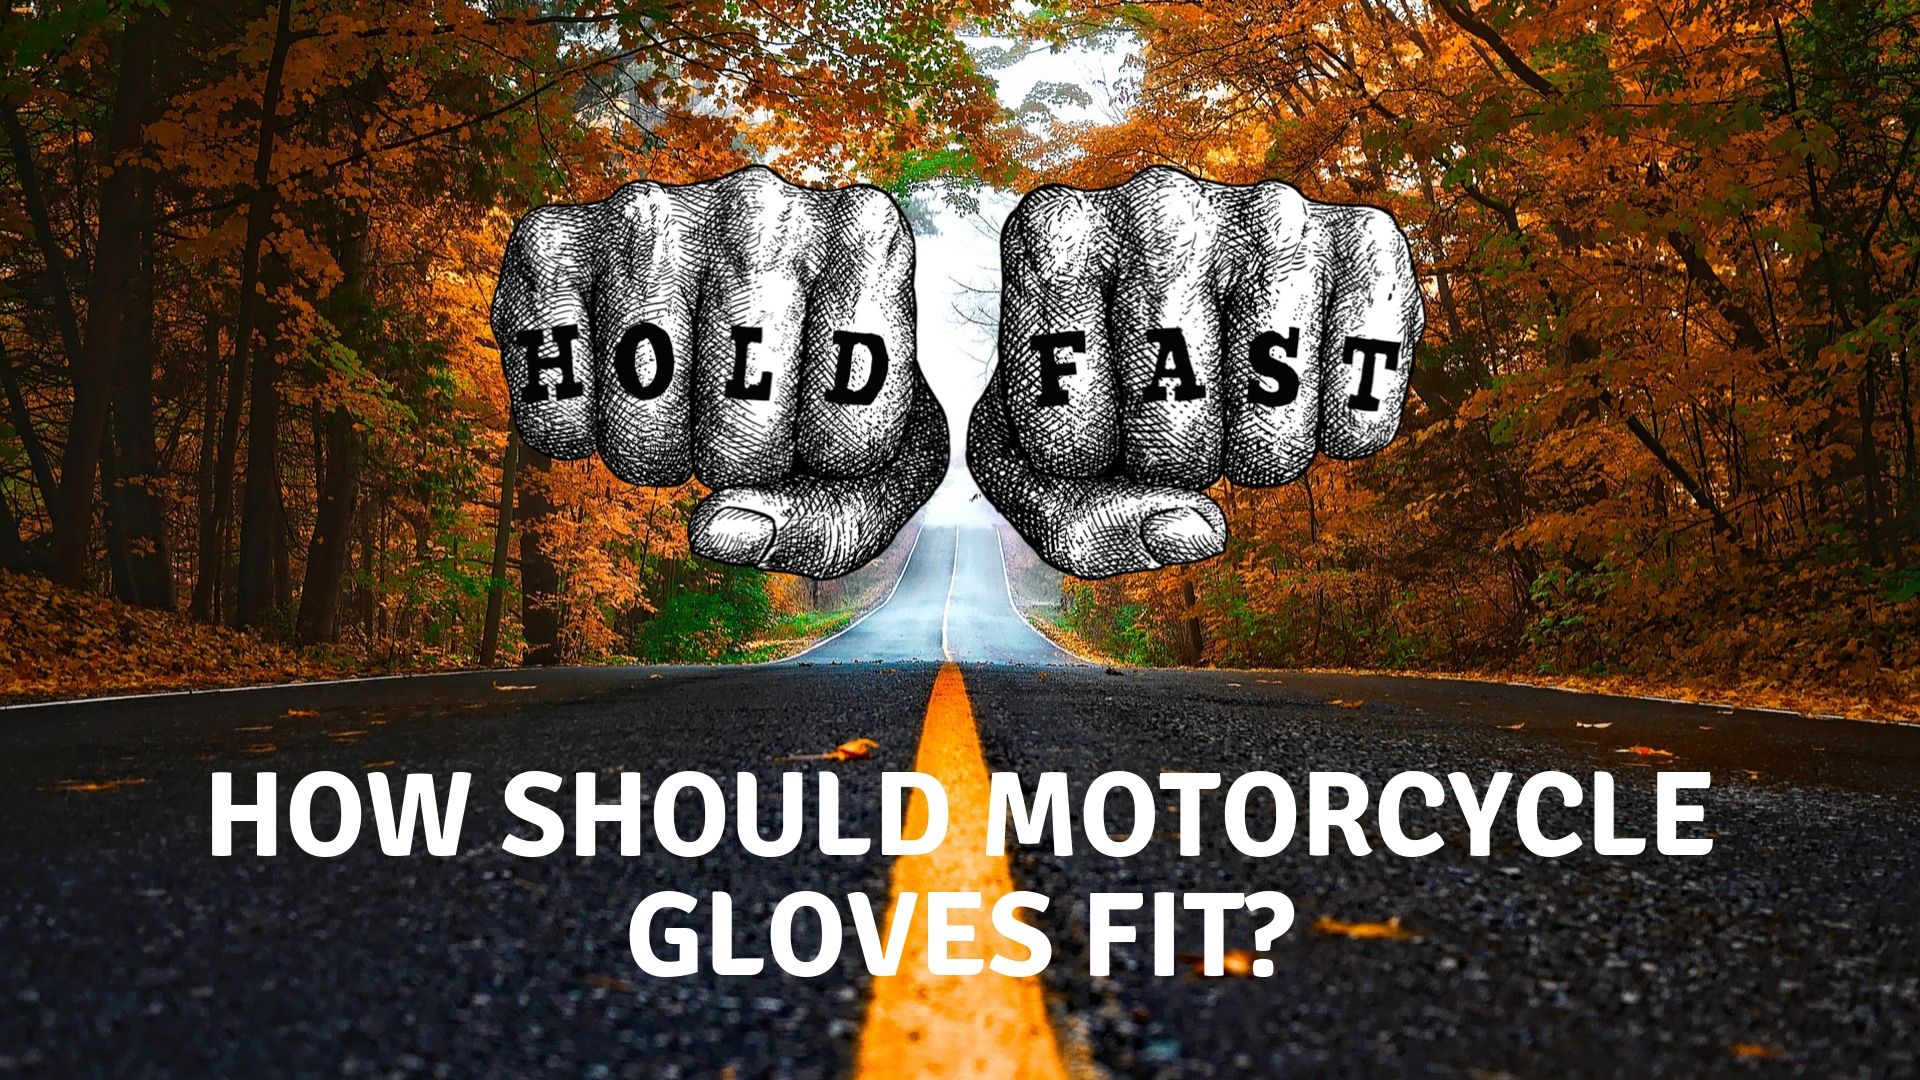 How should motorcycle gloves fit?